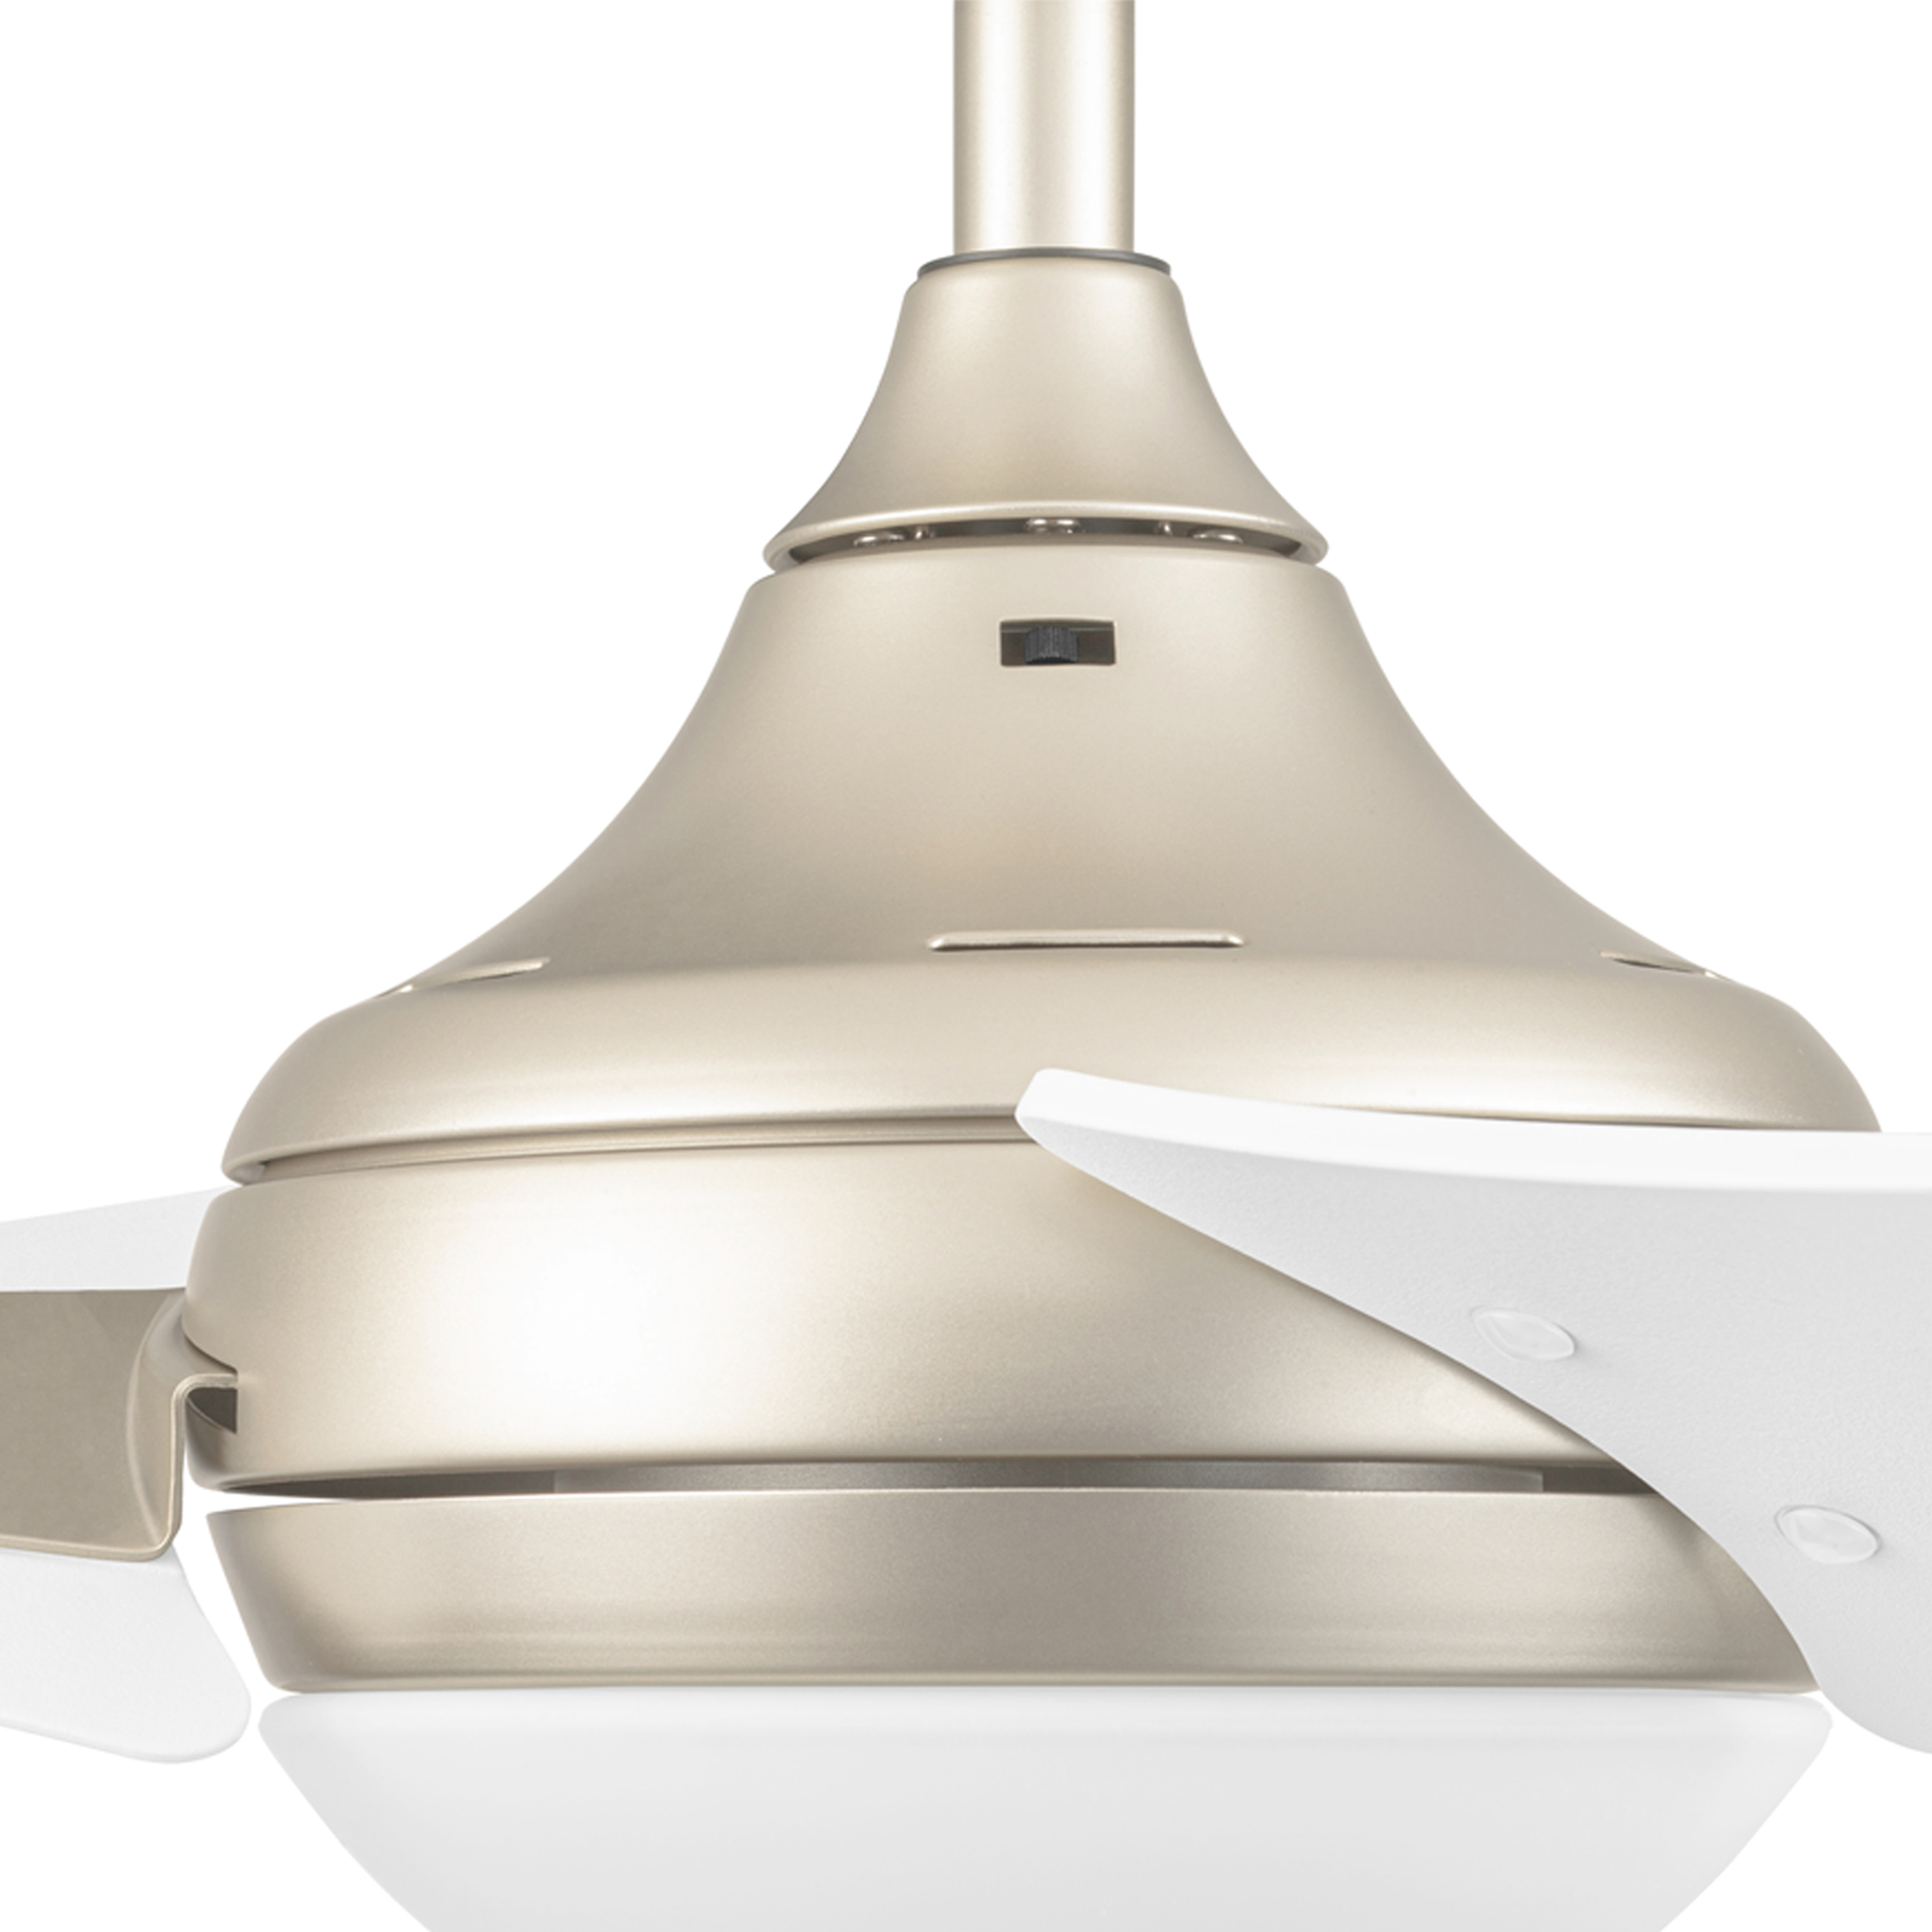 52 Inch Maxon, Soft Gold, Remote Control, Ceiling Fan by Prominence Home